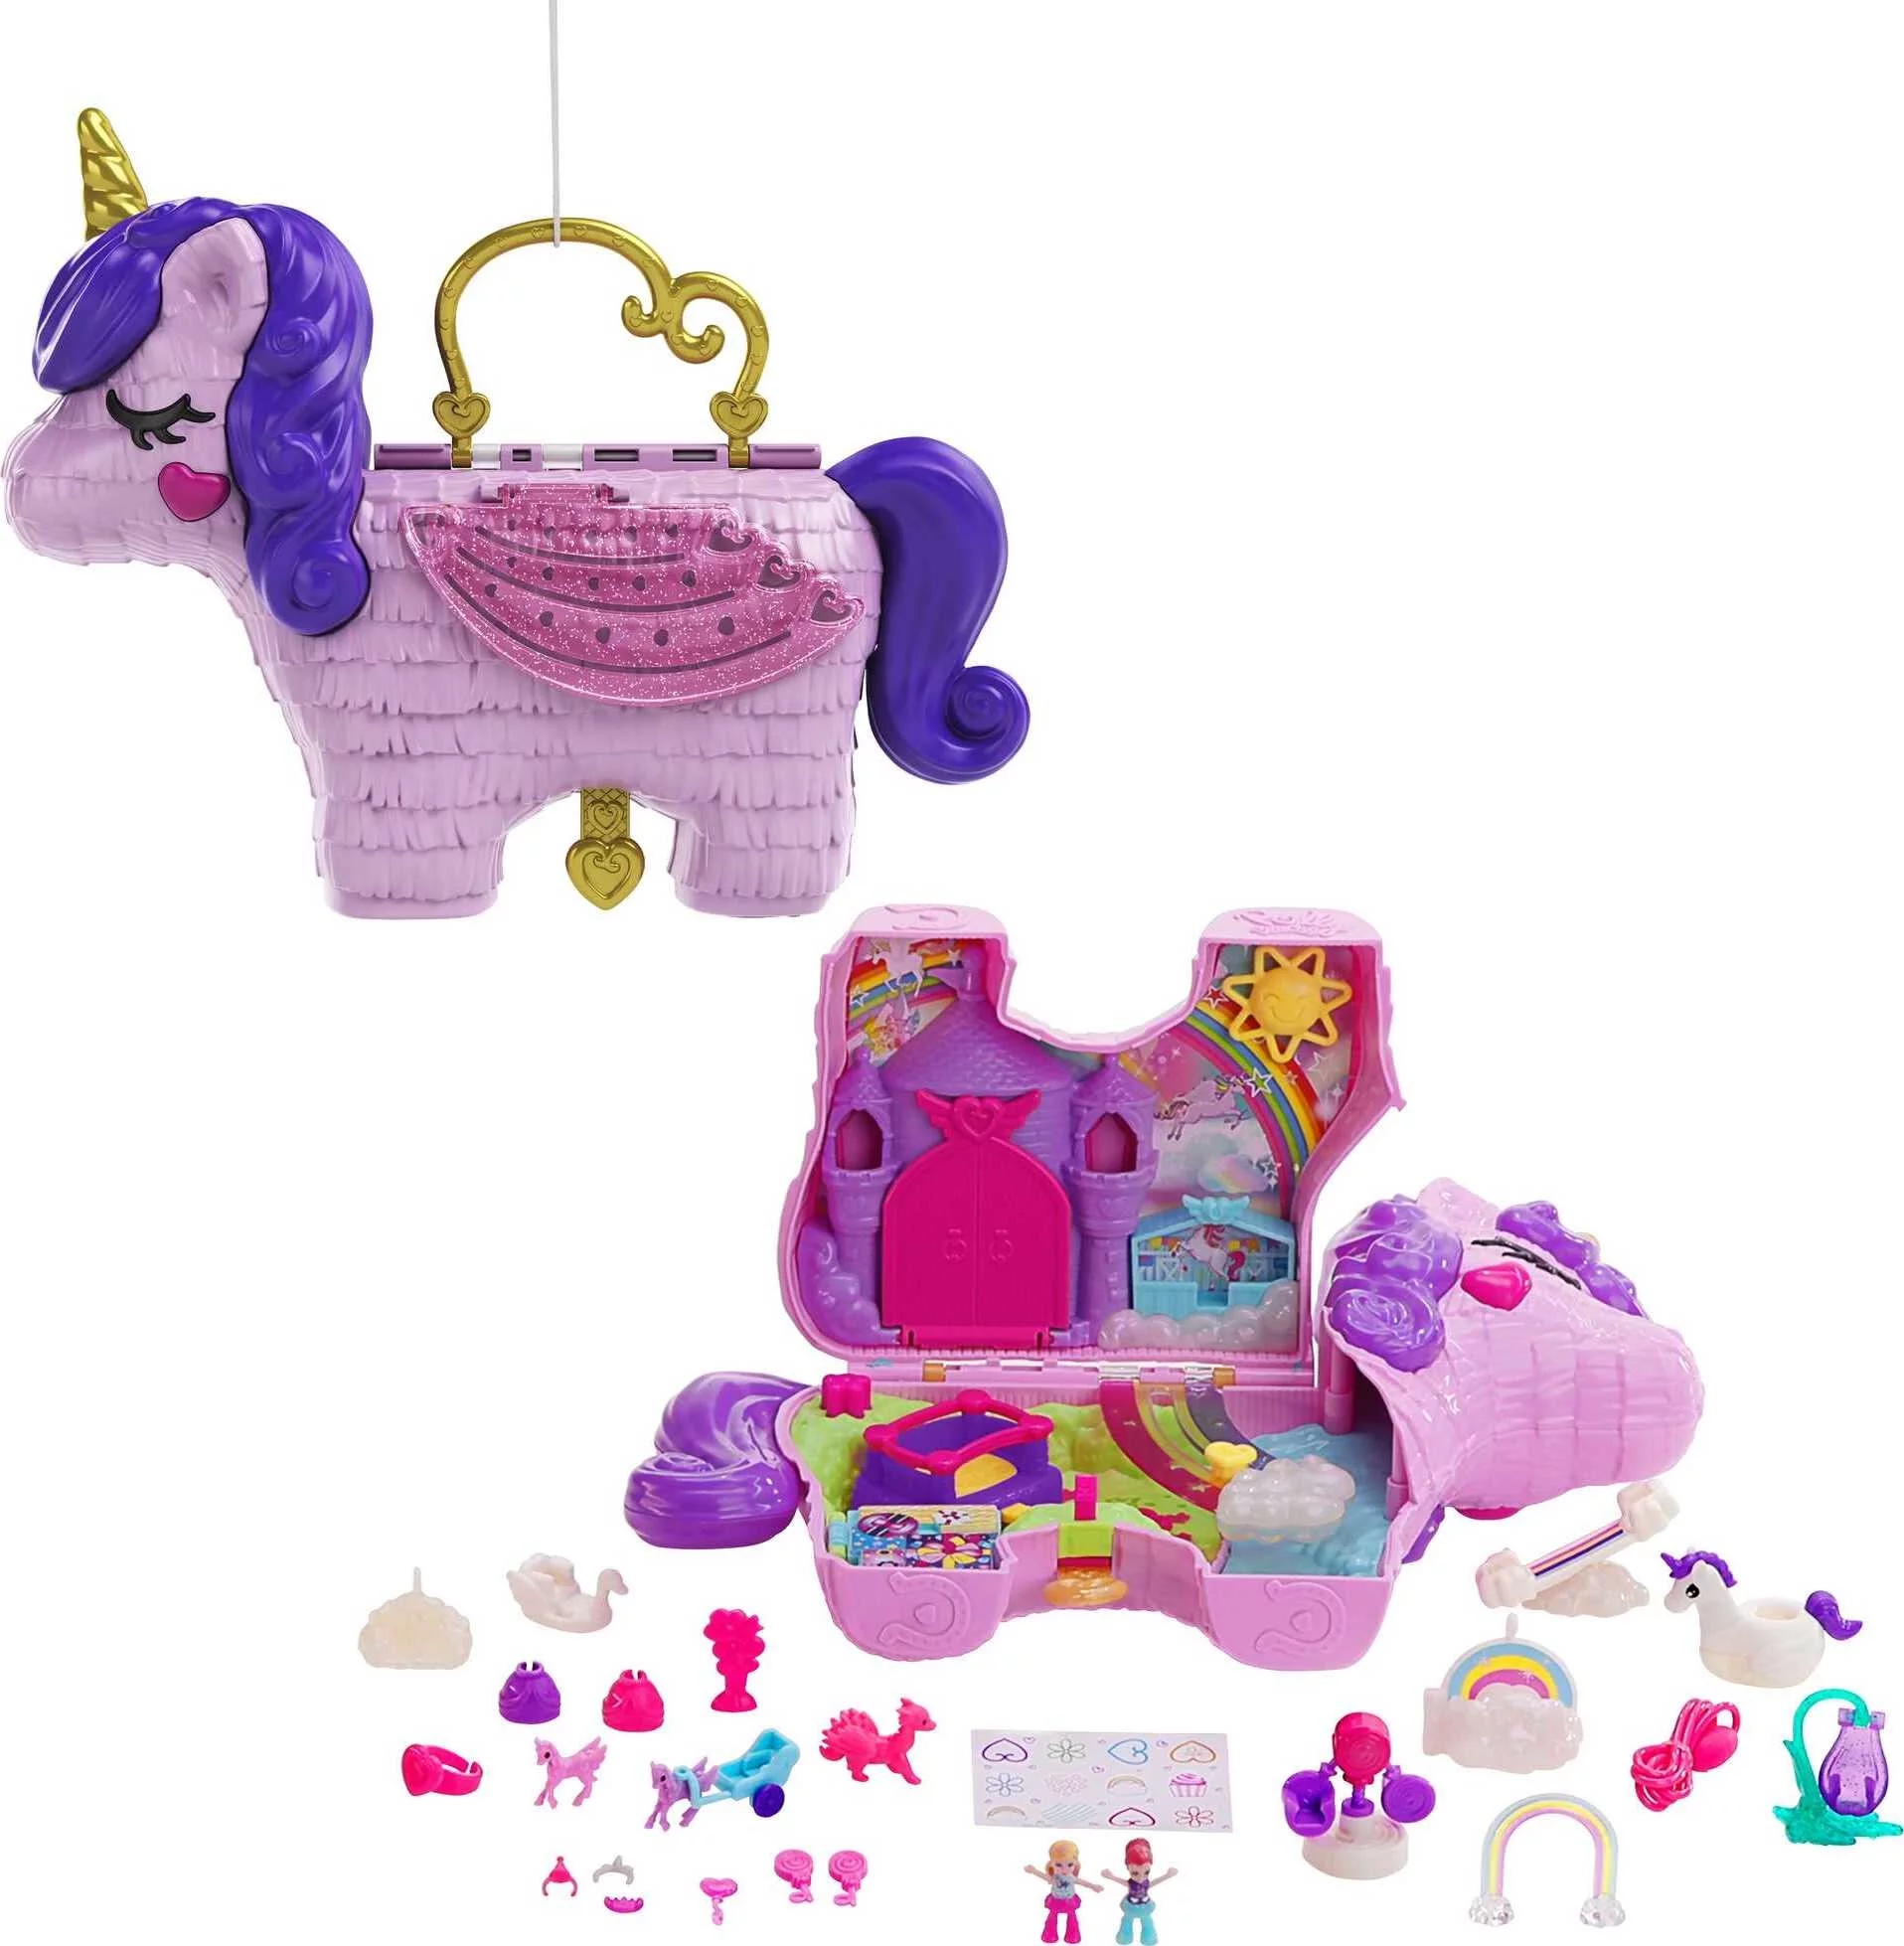 Polly Pocket 2-in-1 Unicorn Party Travel Toy, Large Compact with 2 Dolls & 25 Surprise Accessories